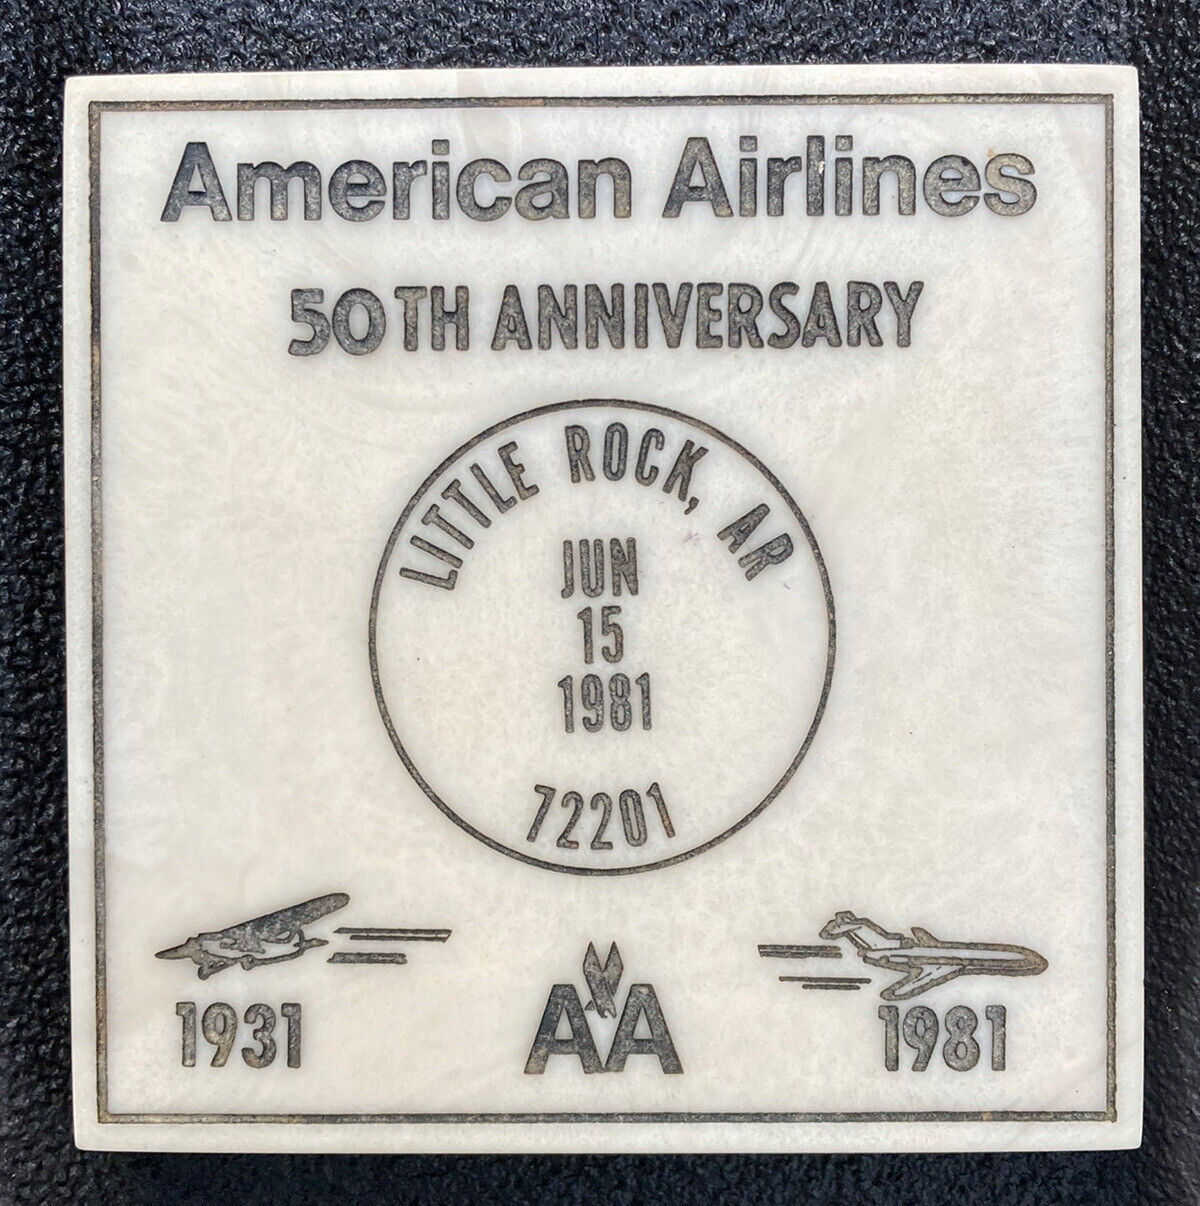 Vintage 1931-1981 AMERICAN AIRLINES - 50TH ANNIVERSARY Little Rock, Ark plaque